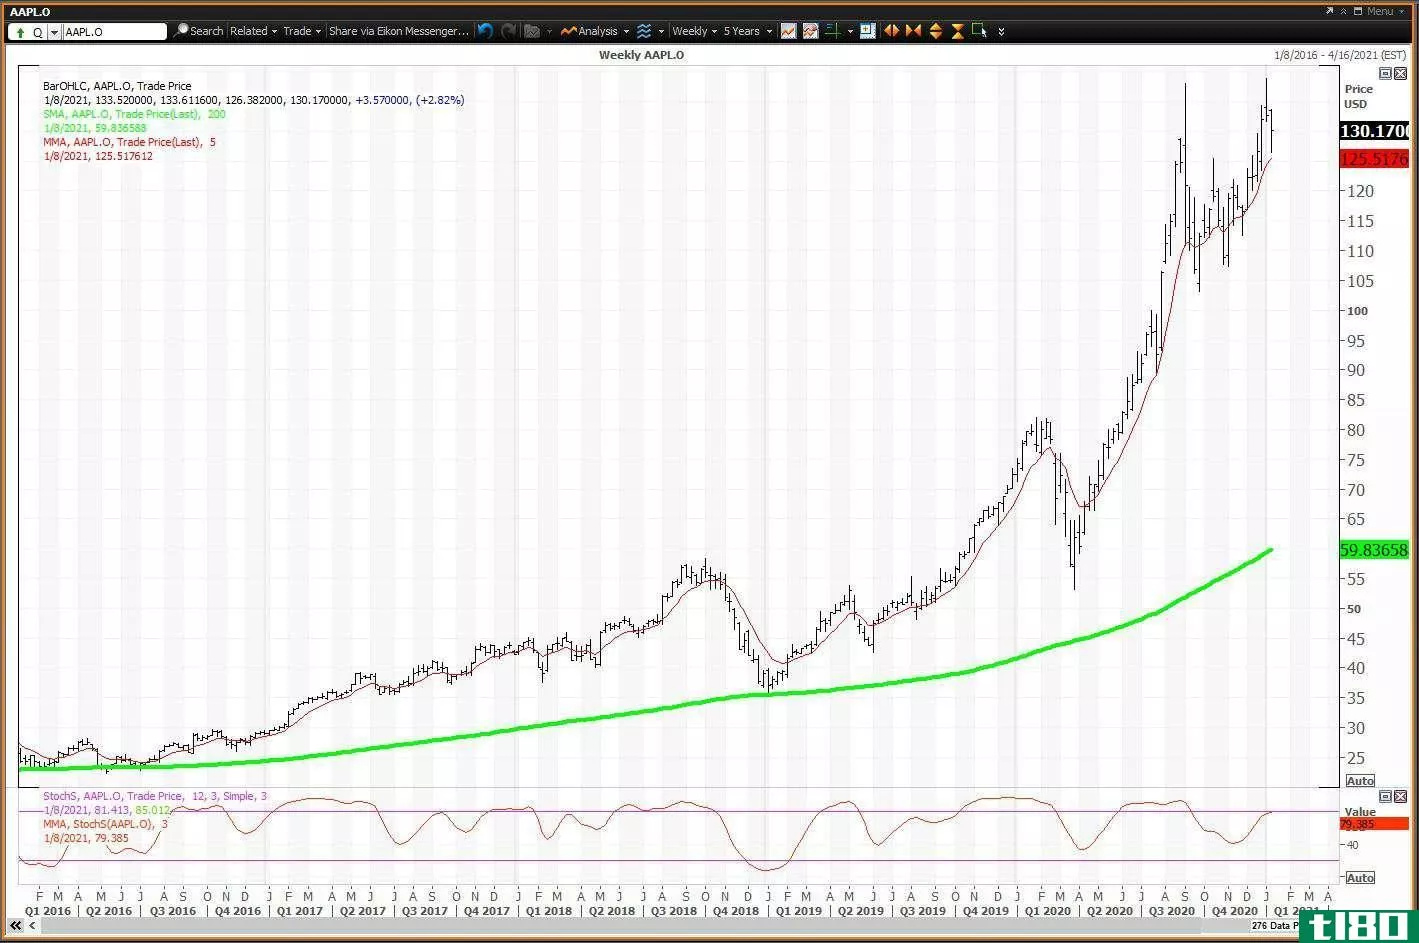 Weekly chart showing the share price performance of Apple Inc (AAPL)